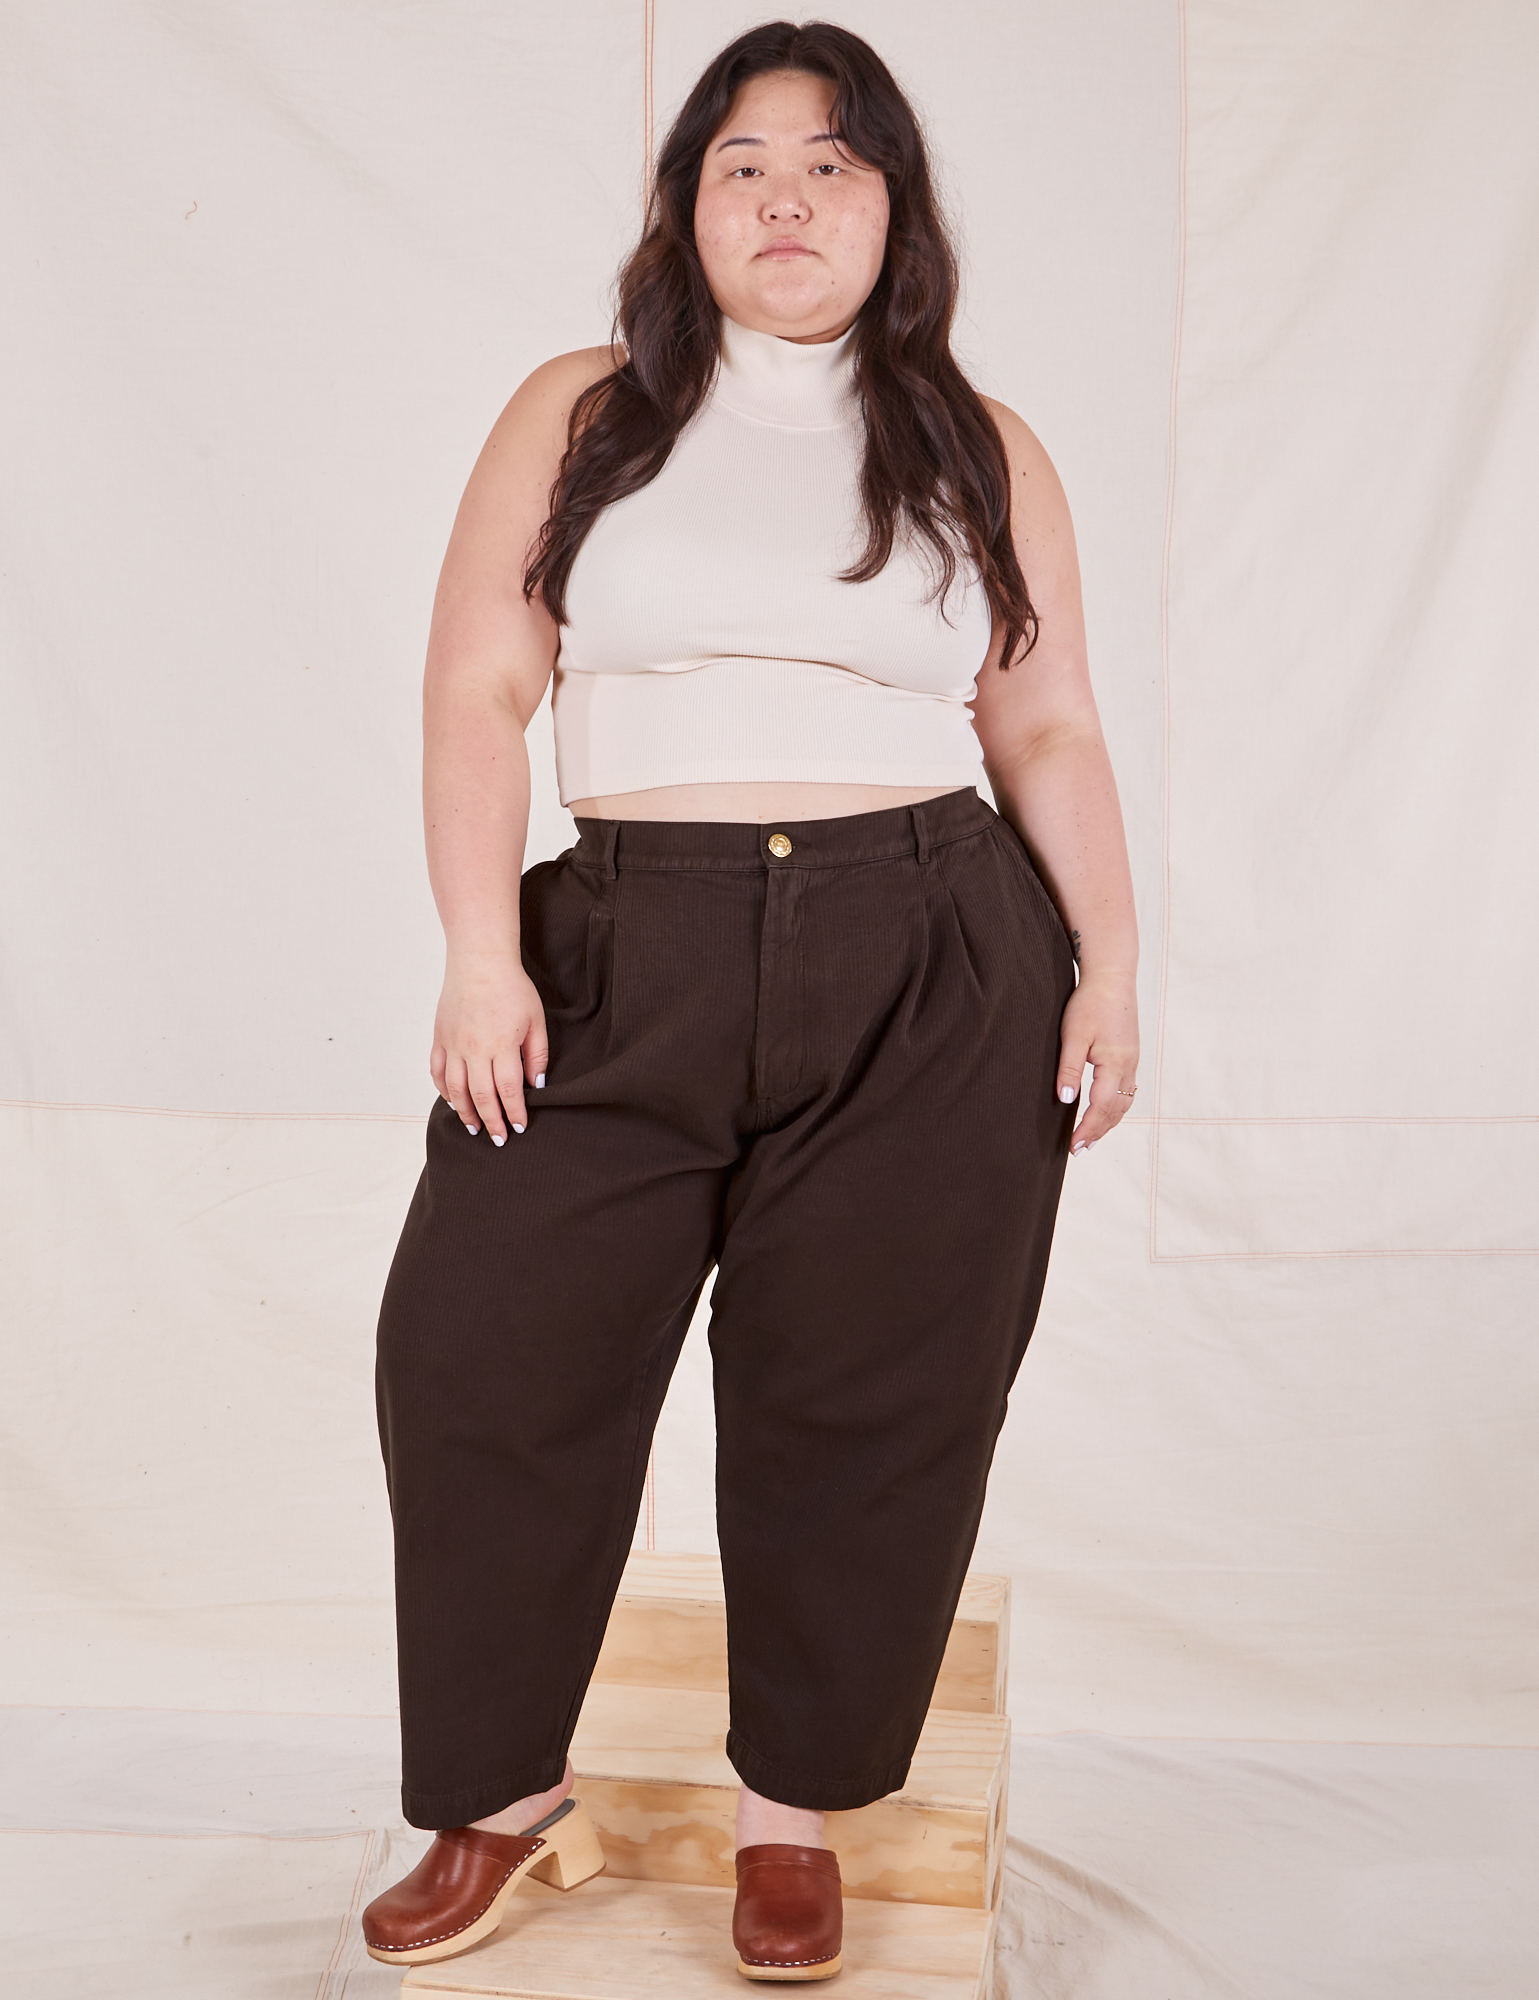 Ashley is 5&#39;7&quot; and wearing 1XL Petite Heritage Trousers in Espresso Brown paired with vintage off-white Sleeveless Turtleneck